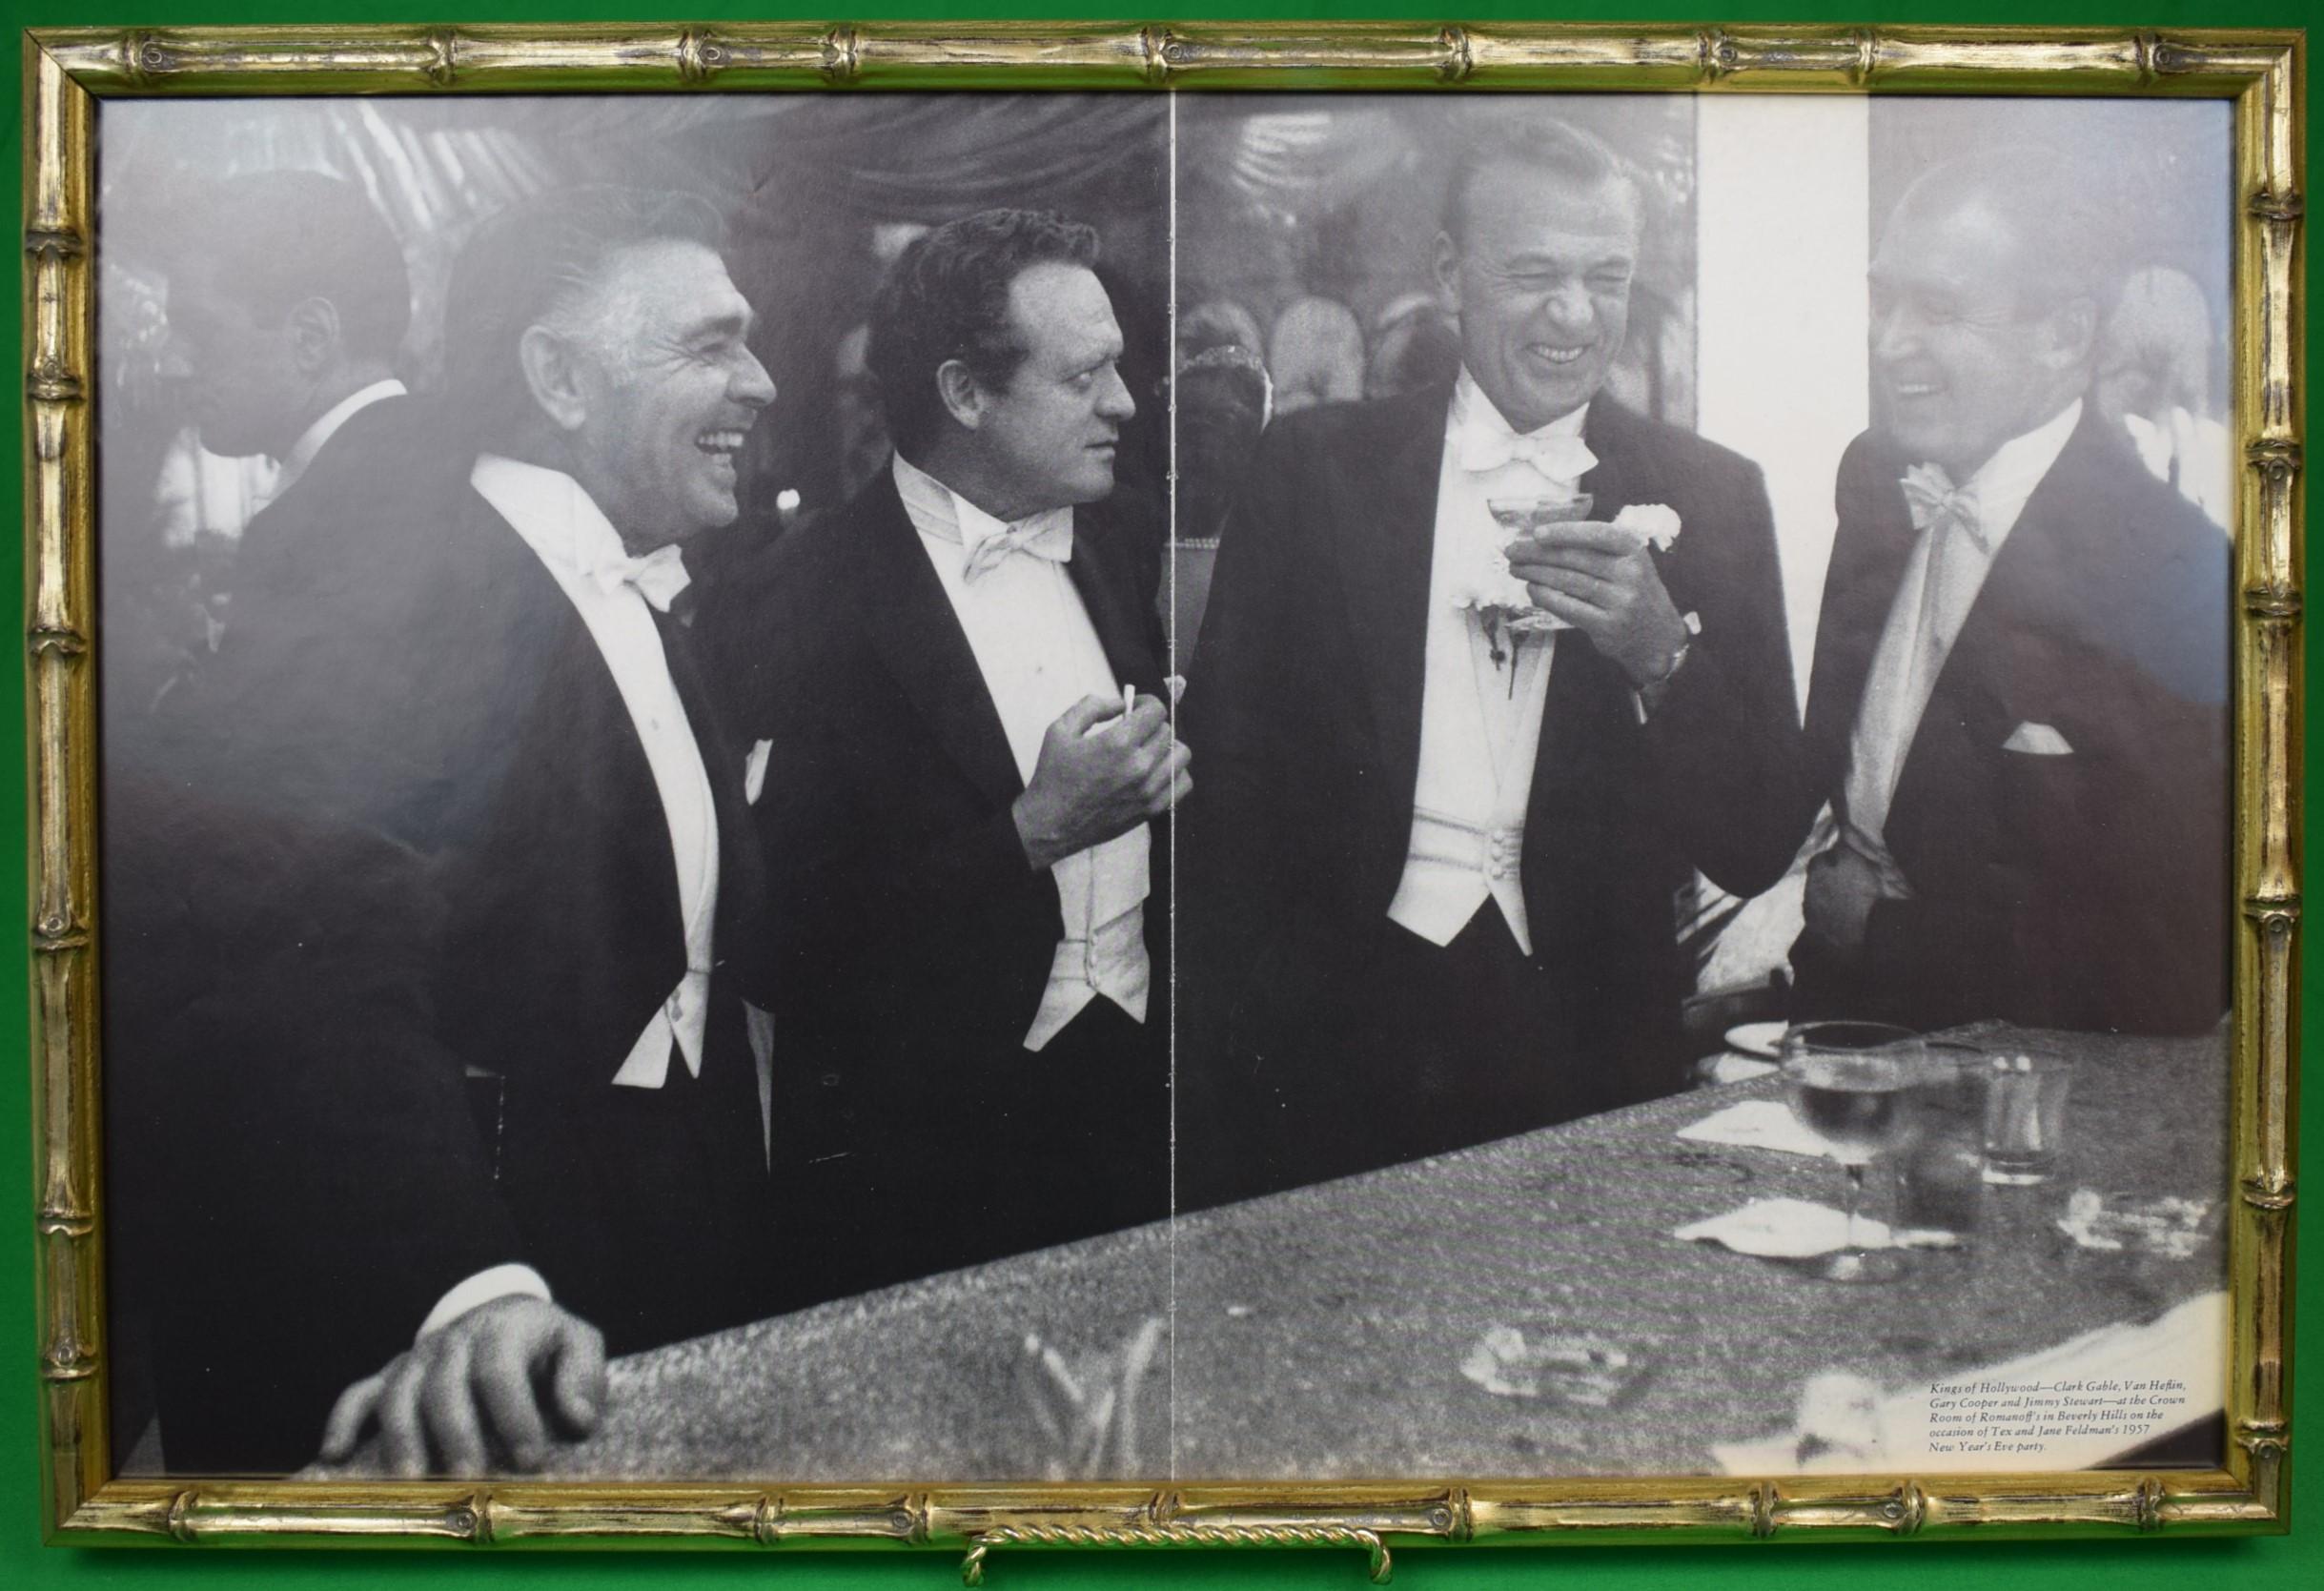 Art Sz: 13"H x 20"W

Frame Sz: 14 1/4"H x 21 1/4"W

In custom gilt bamboo frame

Original color double page from Slim Aarons' iconic book "A Wonderful Time" published 1974

Clark Gable, Van Heflin, Gary Cooper and Jimmy Stewart- At The Crown Room Of